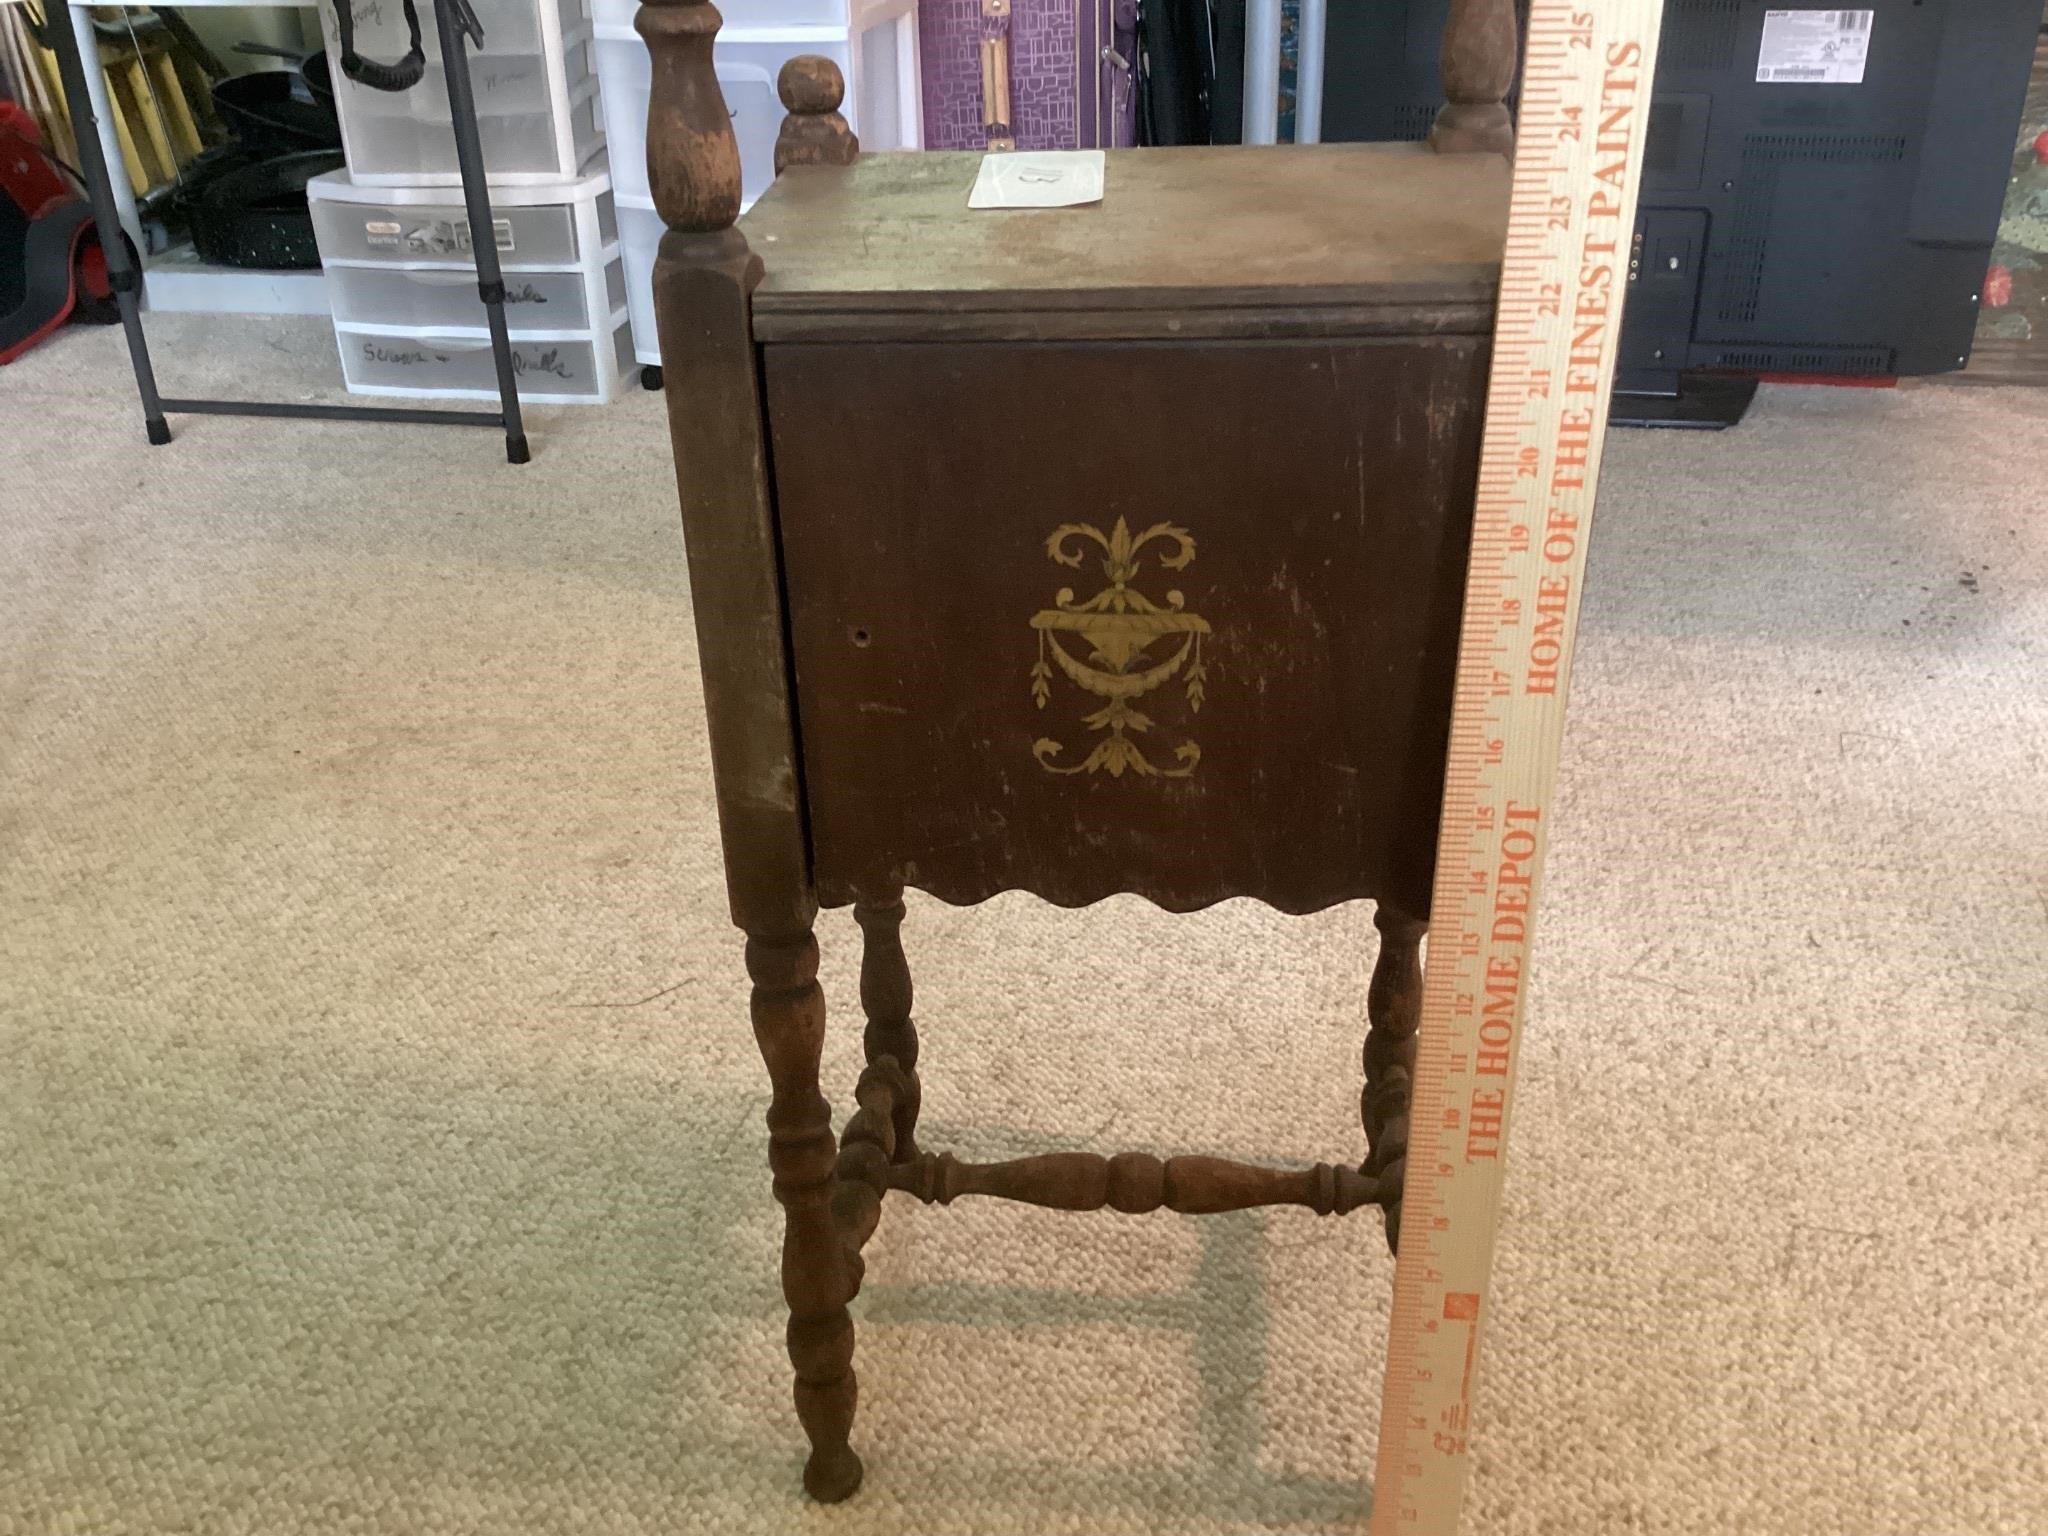 VINTAGE SMALL TABLE